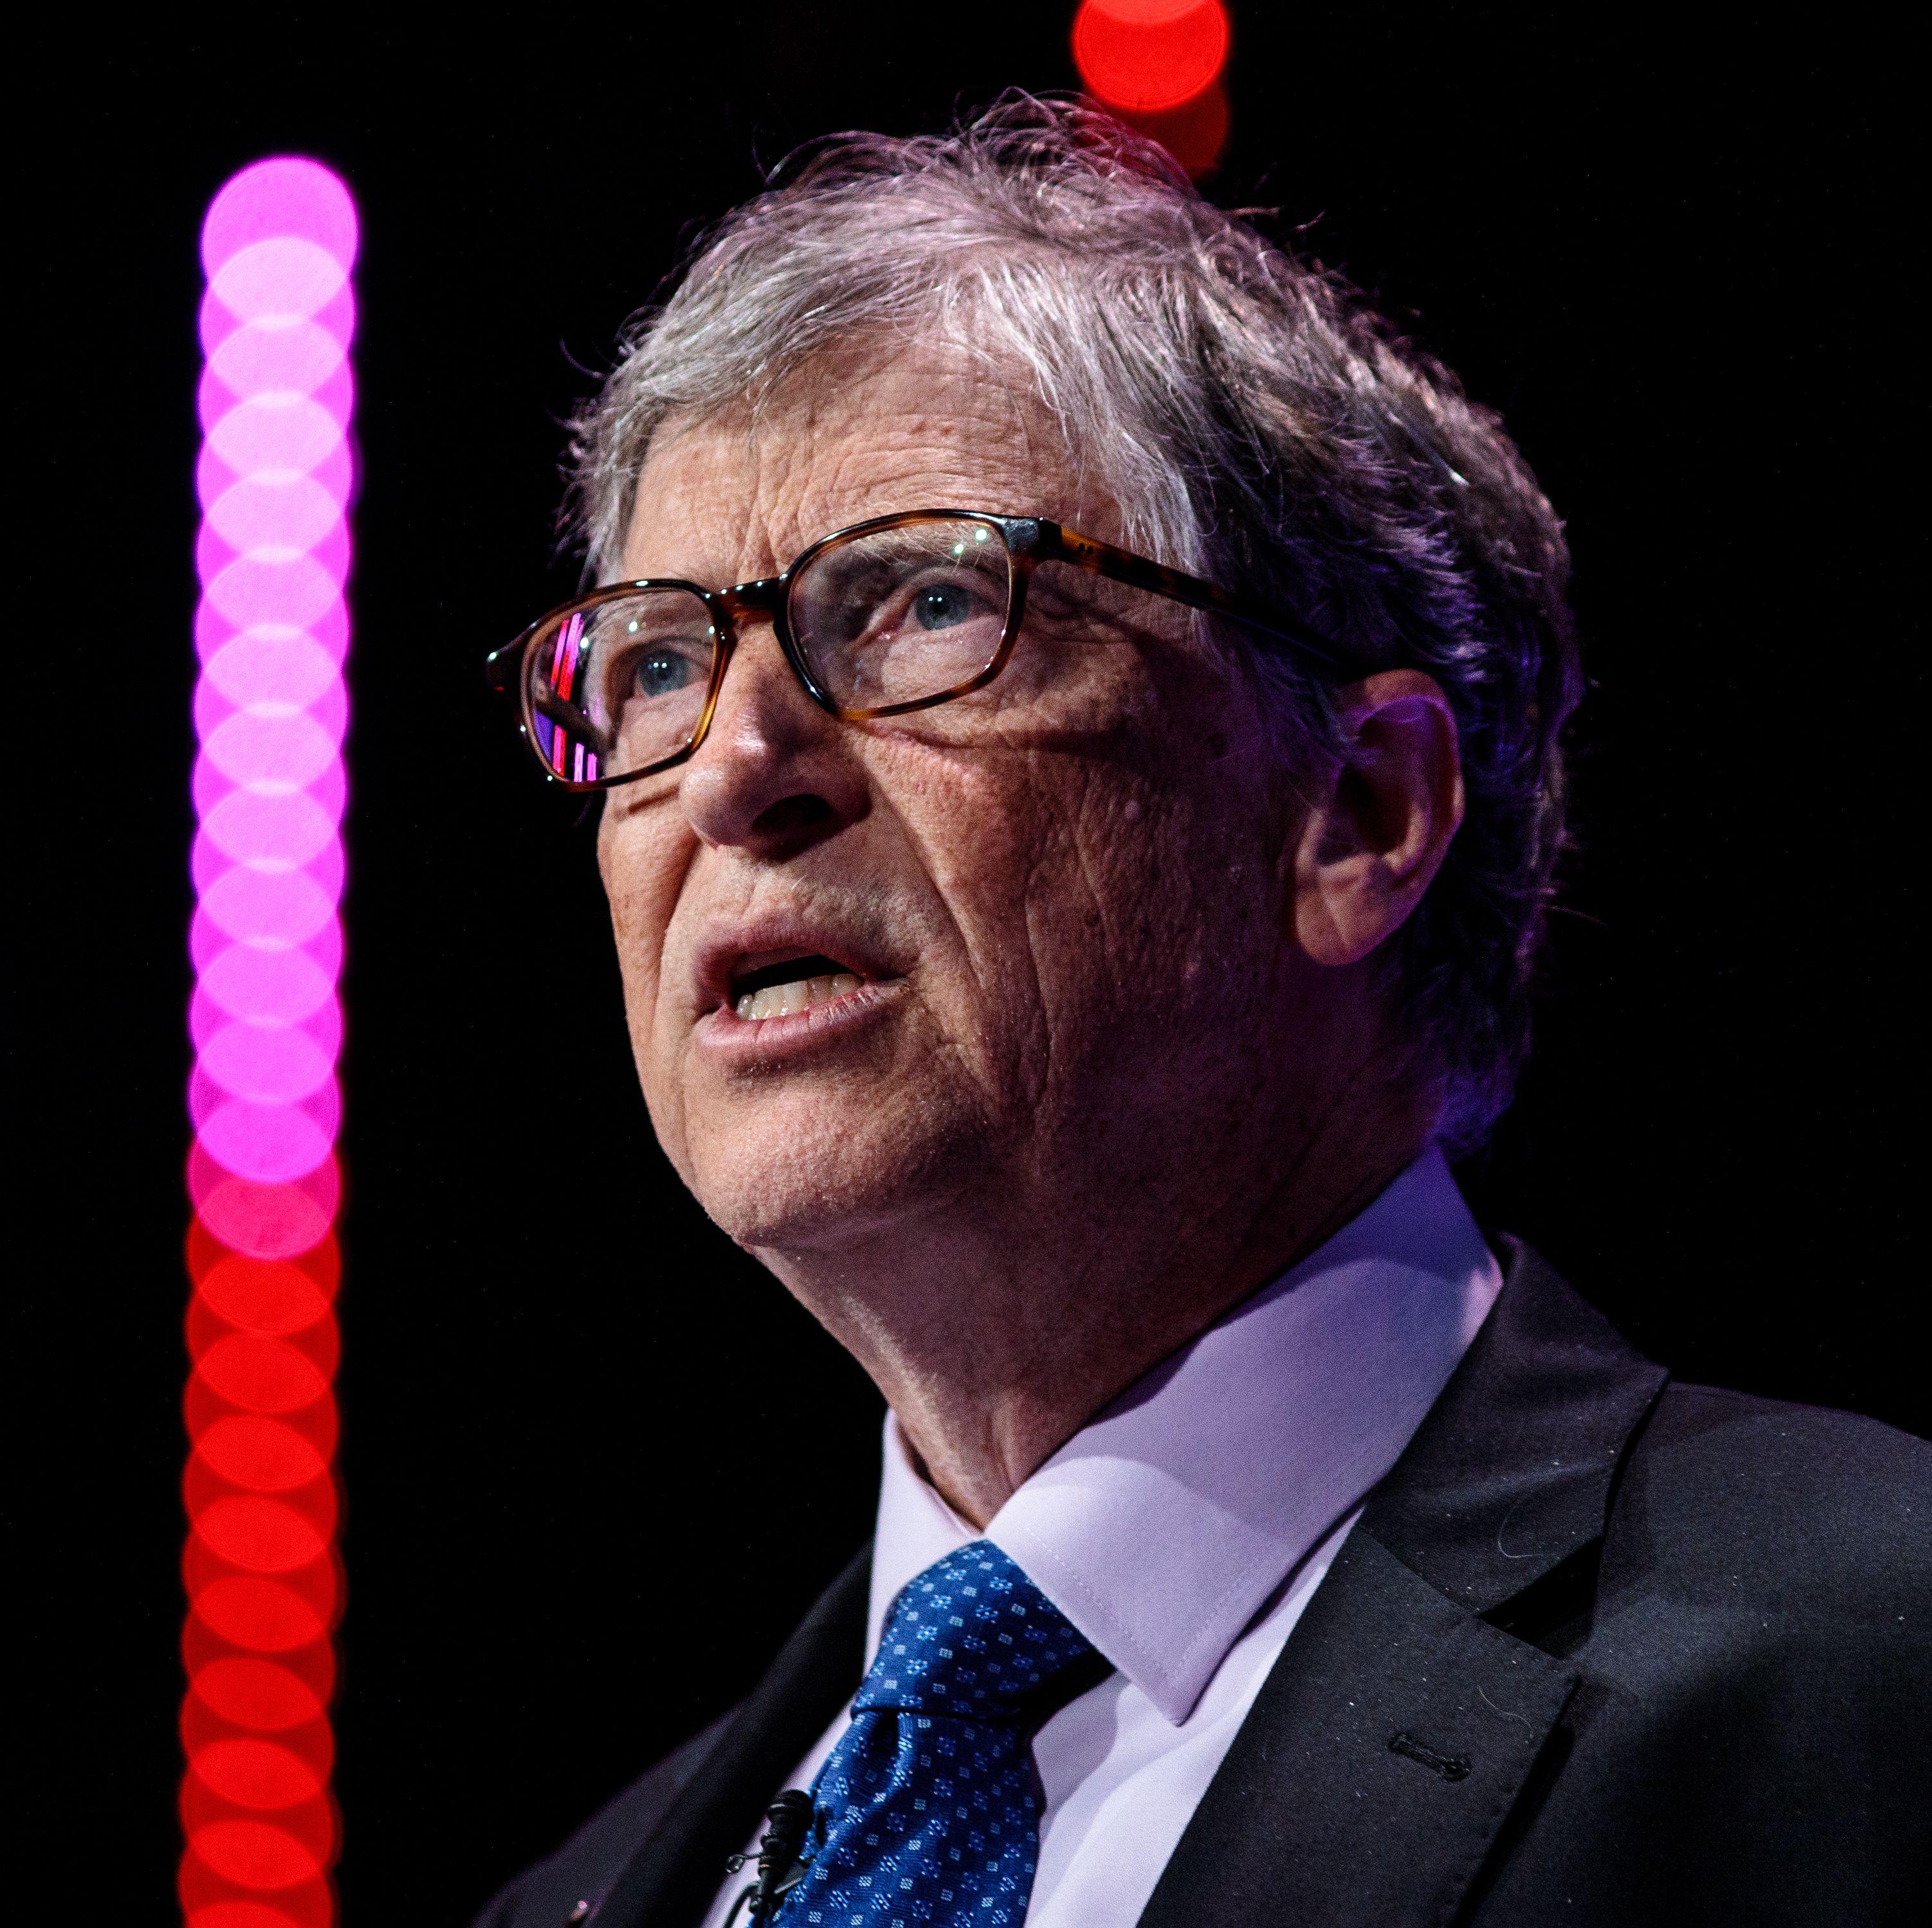 Bill Gates Says Bitcoin Is Bad for the Planet. He's Not Wrong.